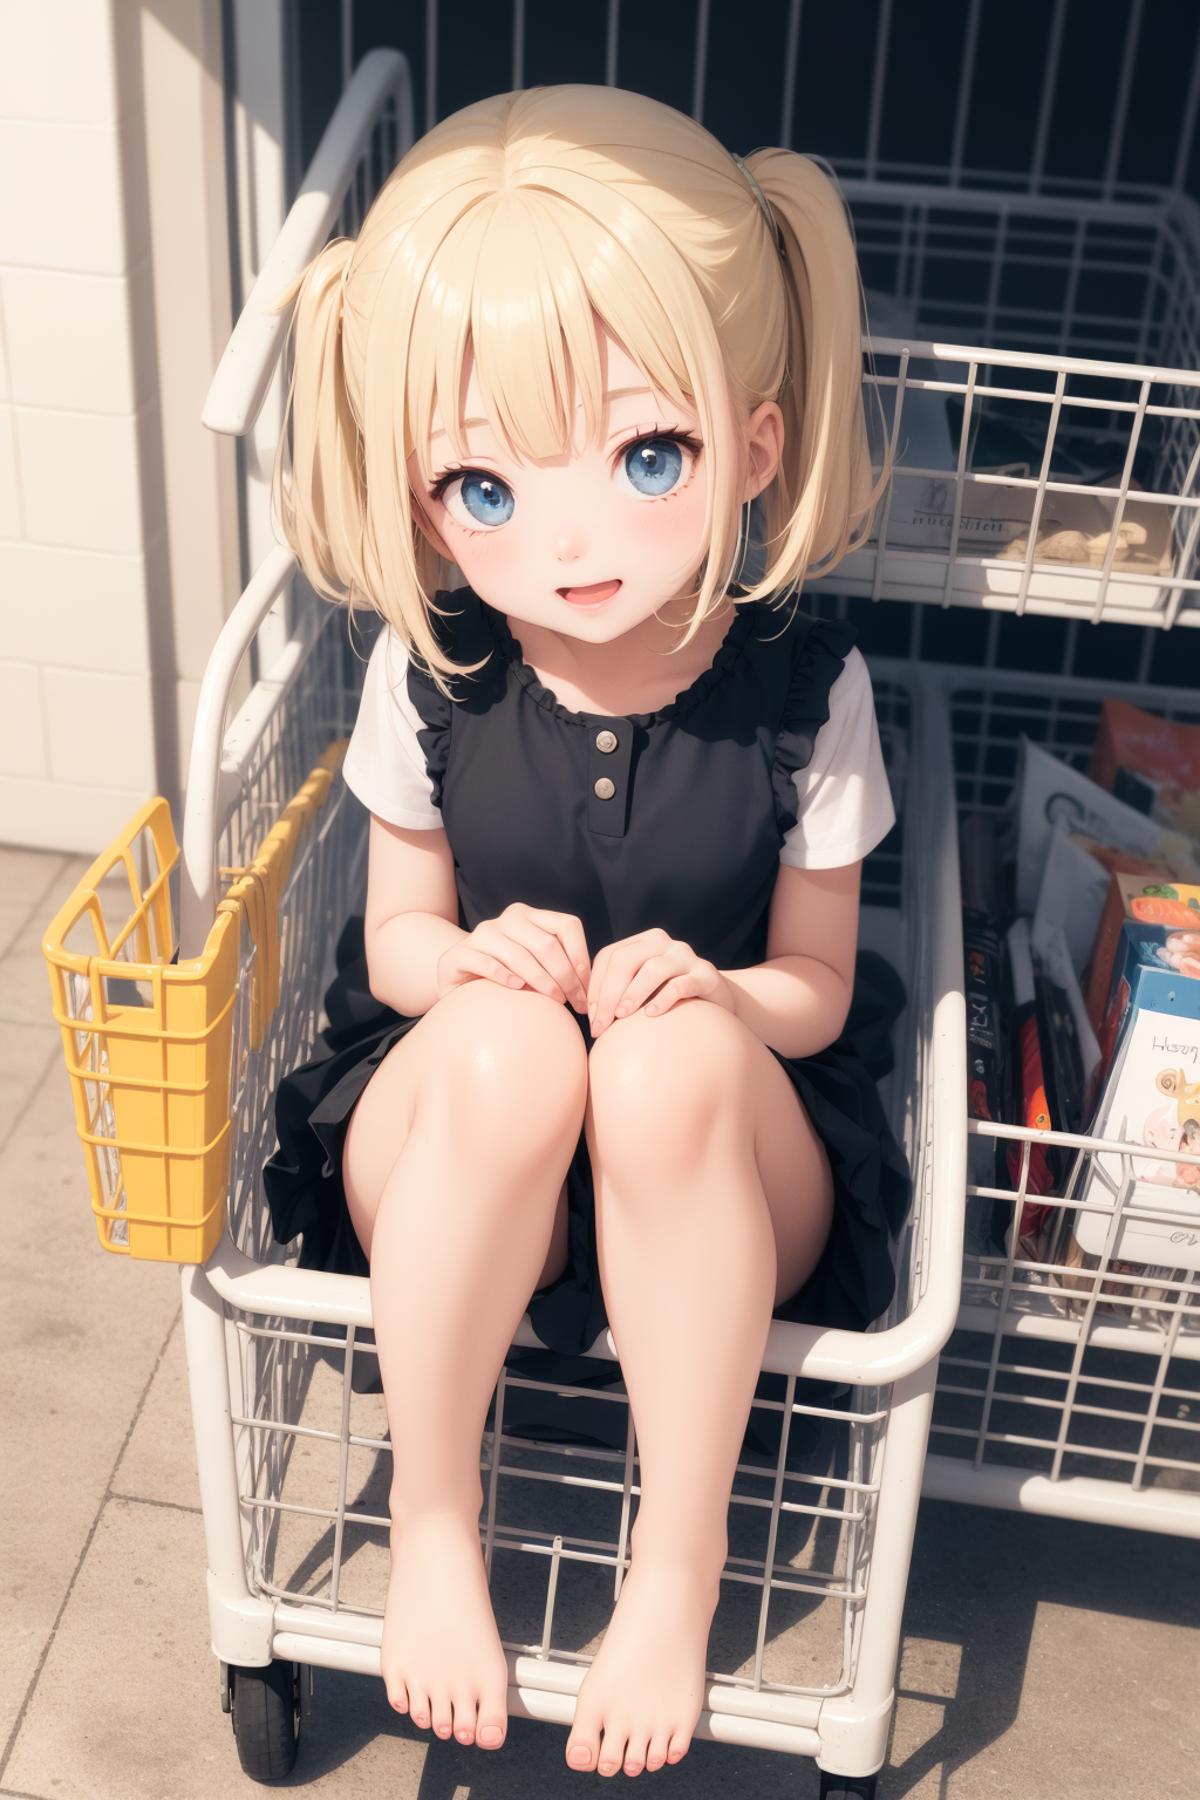 A little girl sitting in a shopping cart with a shelf of books behind her.